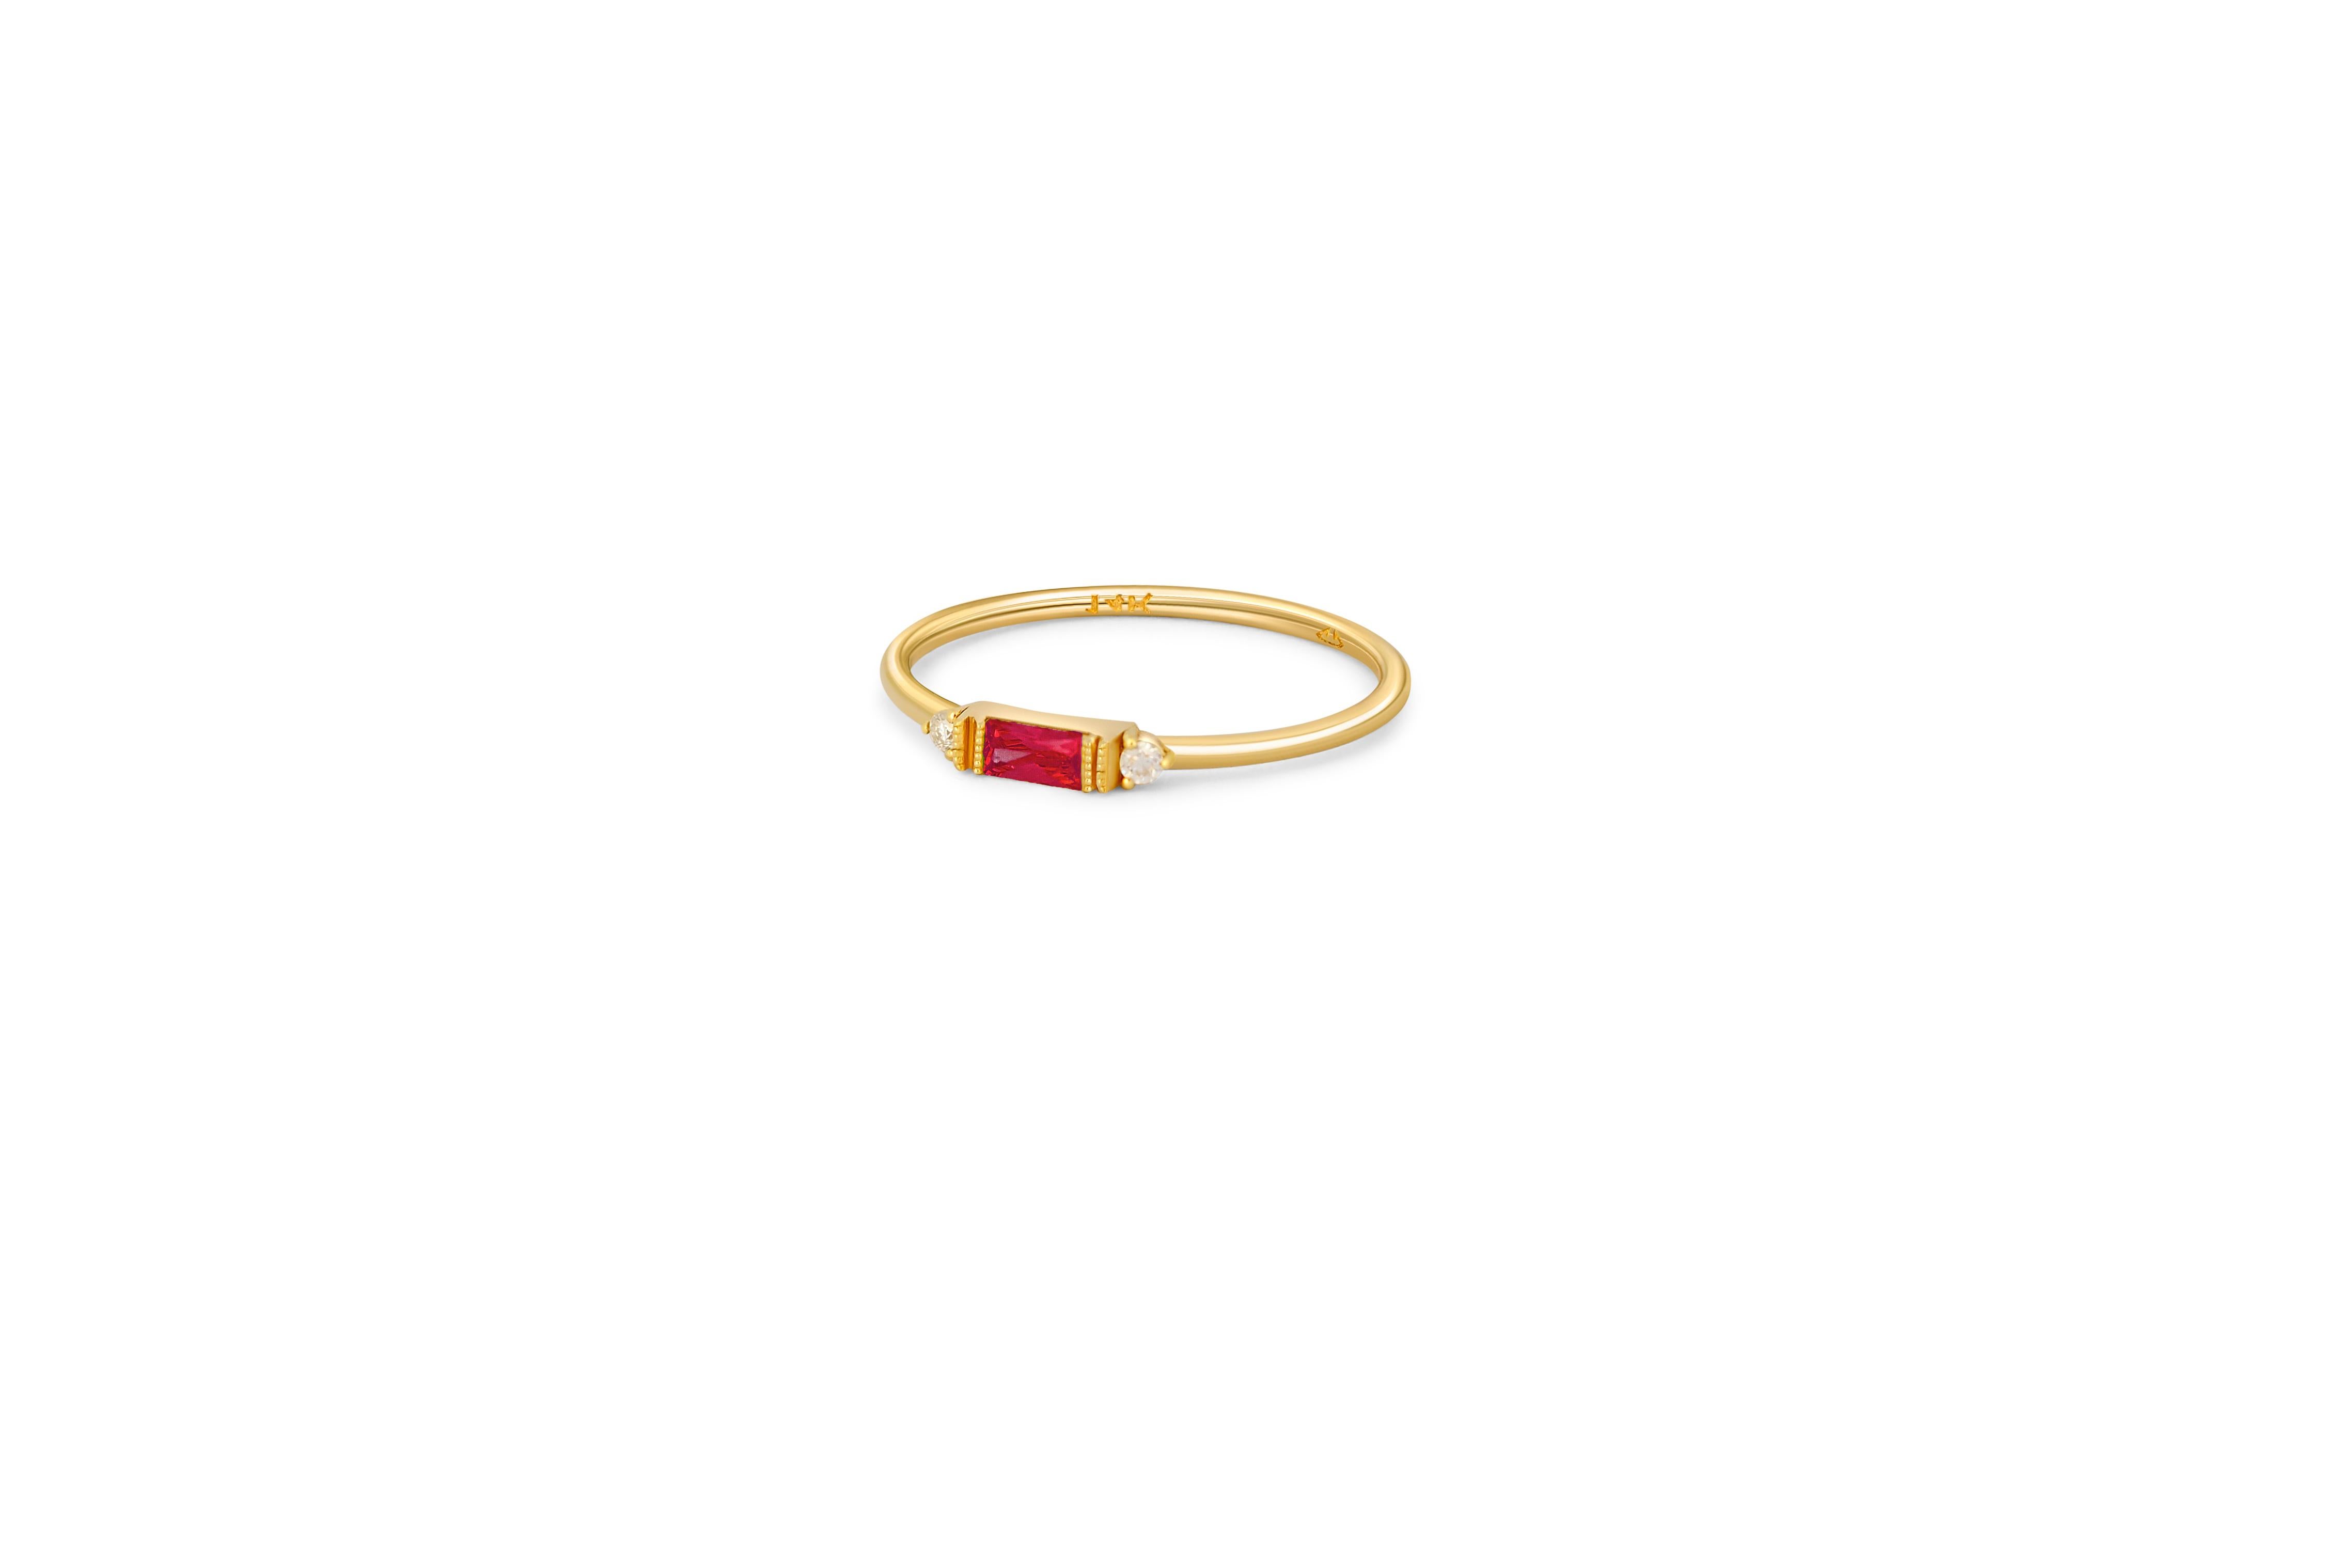 East west Baguette Cut Lab Ruby Engagement 14k gold Ring. Lab ruby Ring. Baguette Ruby Ring. 14k Solid Gold Minimalist Red Gemstone Ring. Stacking Ruby and Moissanite Ring. Minimalist Ring. Simple Ruby Ring. July birthstone Jewelry

Metal: 14k